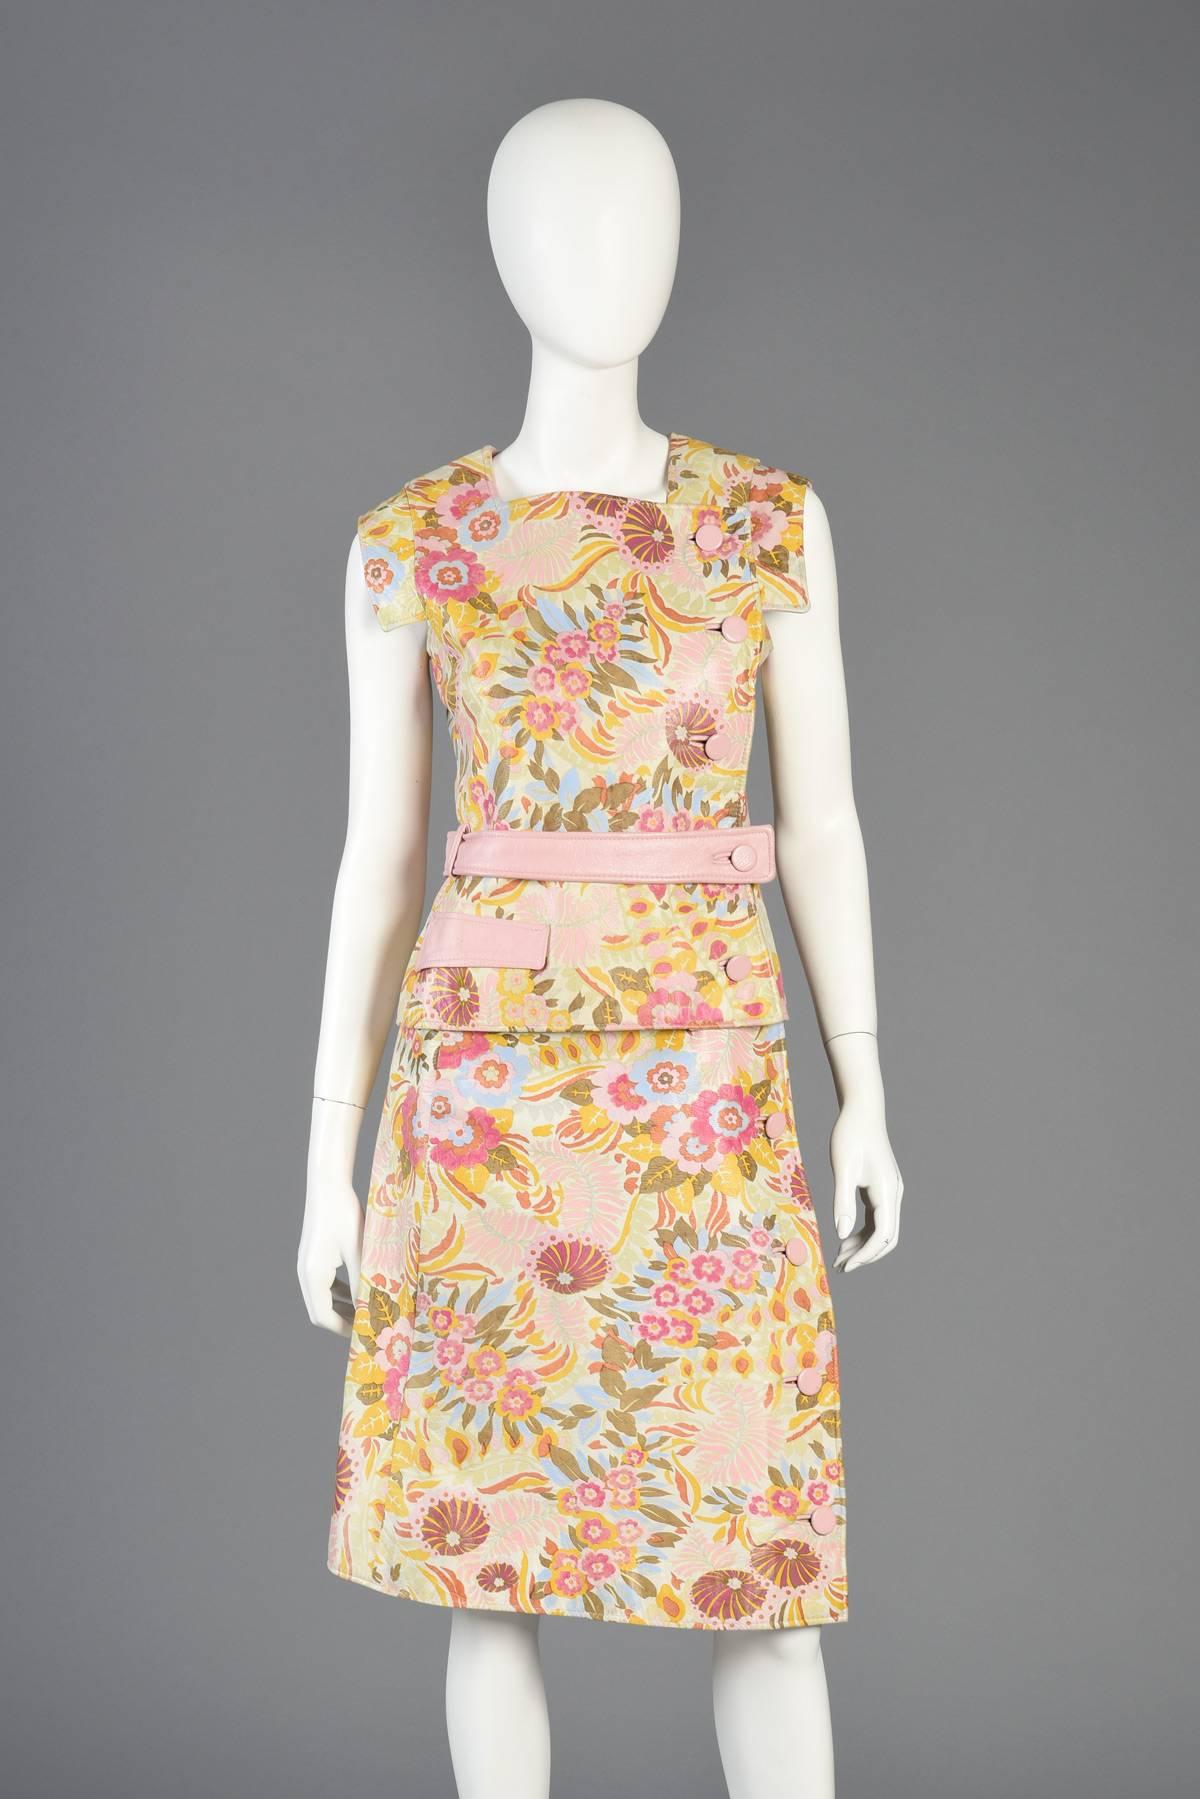 Incredible vintage 1960s 3-piece hand-painted floral leather ensemble by Samuel Robert. Pale ivory leather with hand-painted rainbow florals. Space age meets avant garde top features asymmetric button closure, winged shoulders, angled pocket + belt.